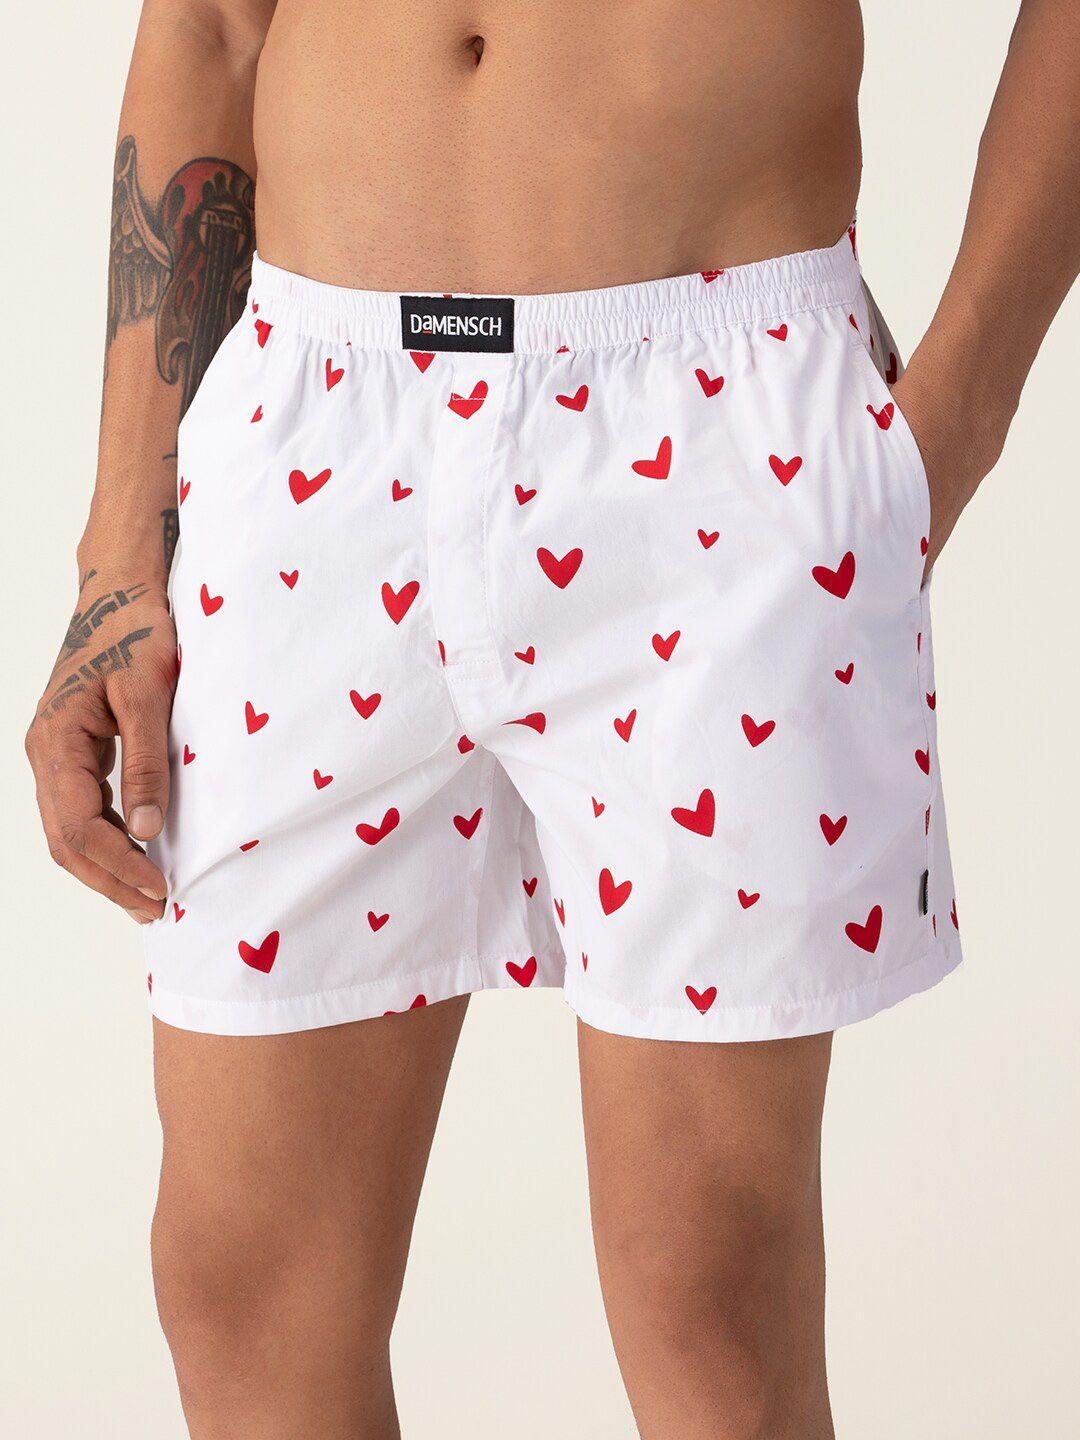 damensch breeeze men white & red printed pure cotton ultra-light boxers